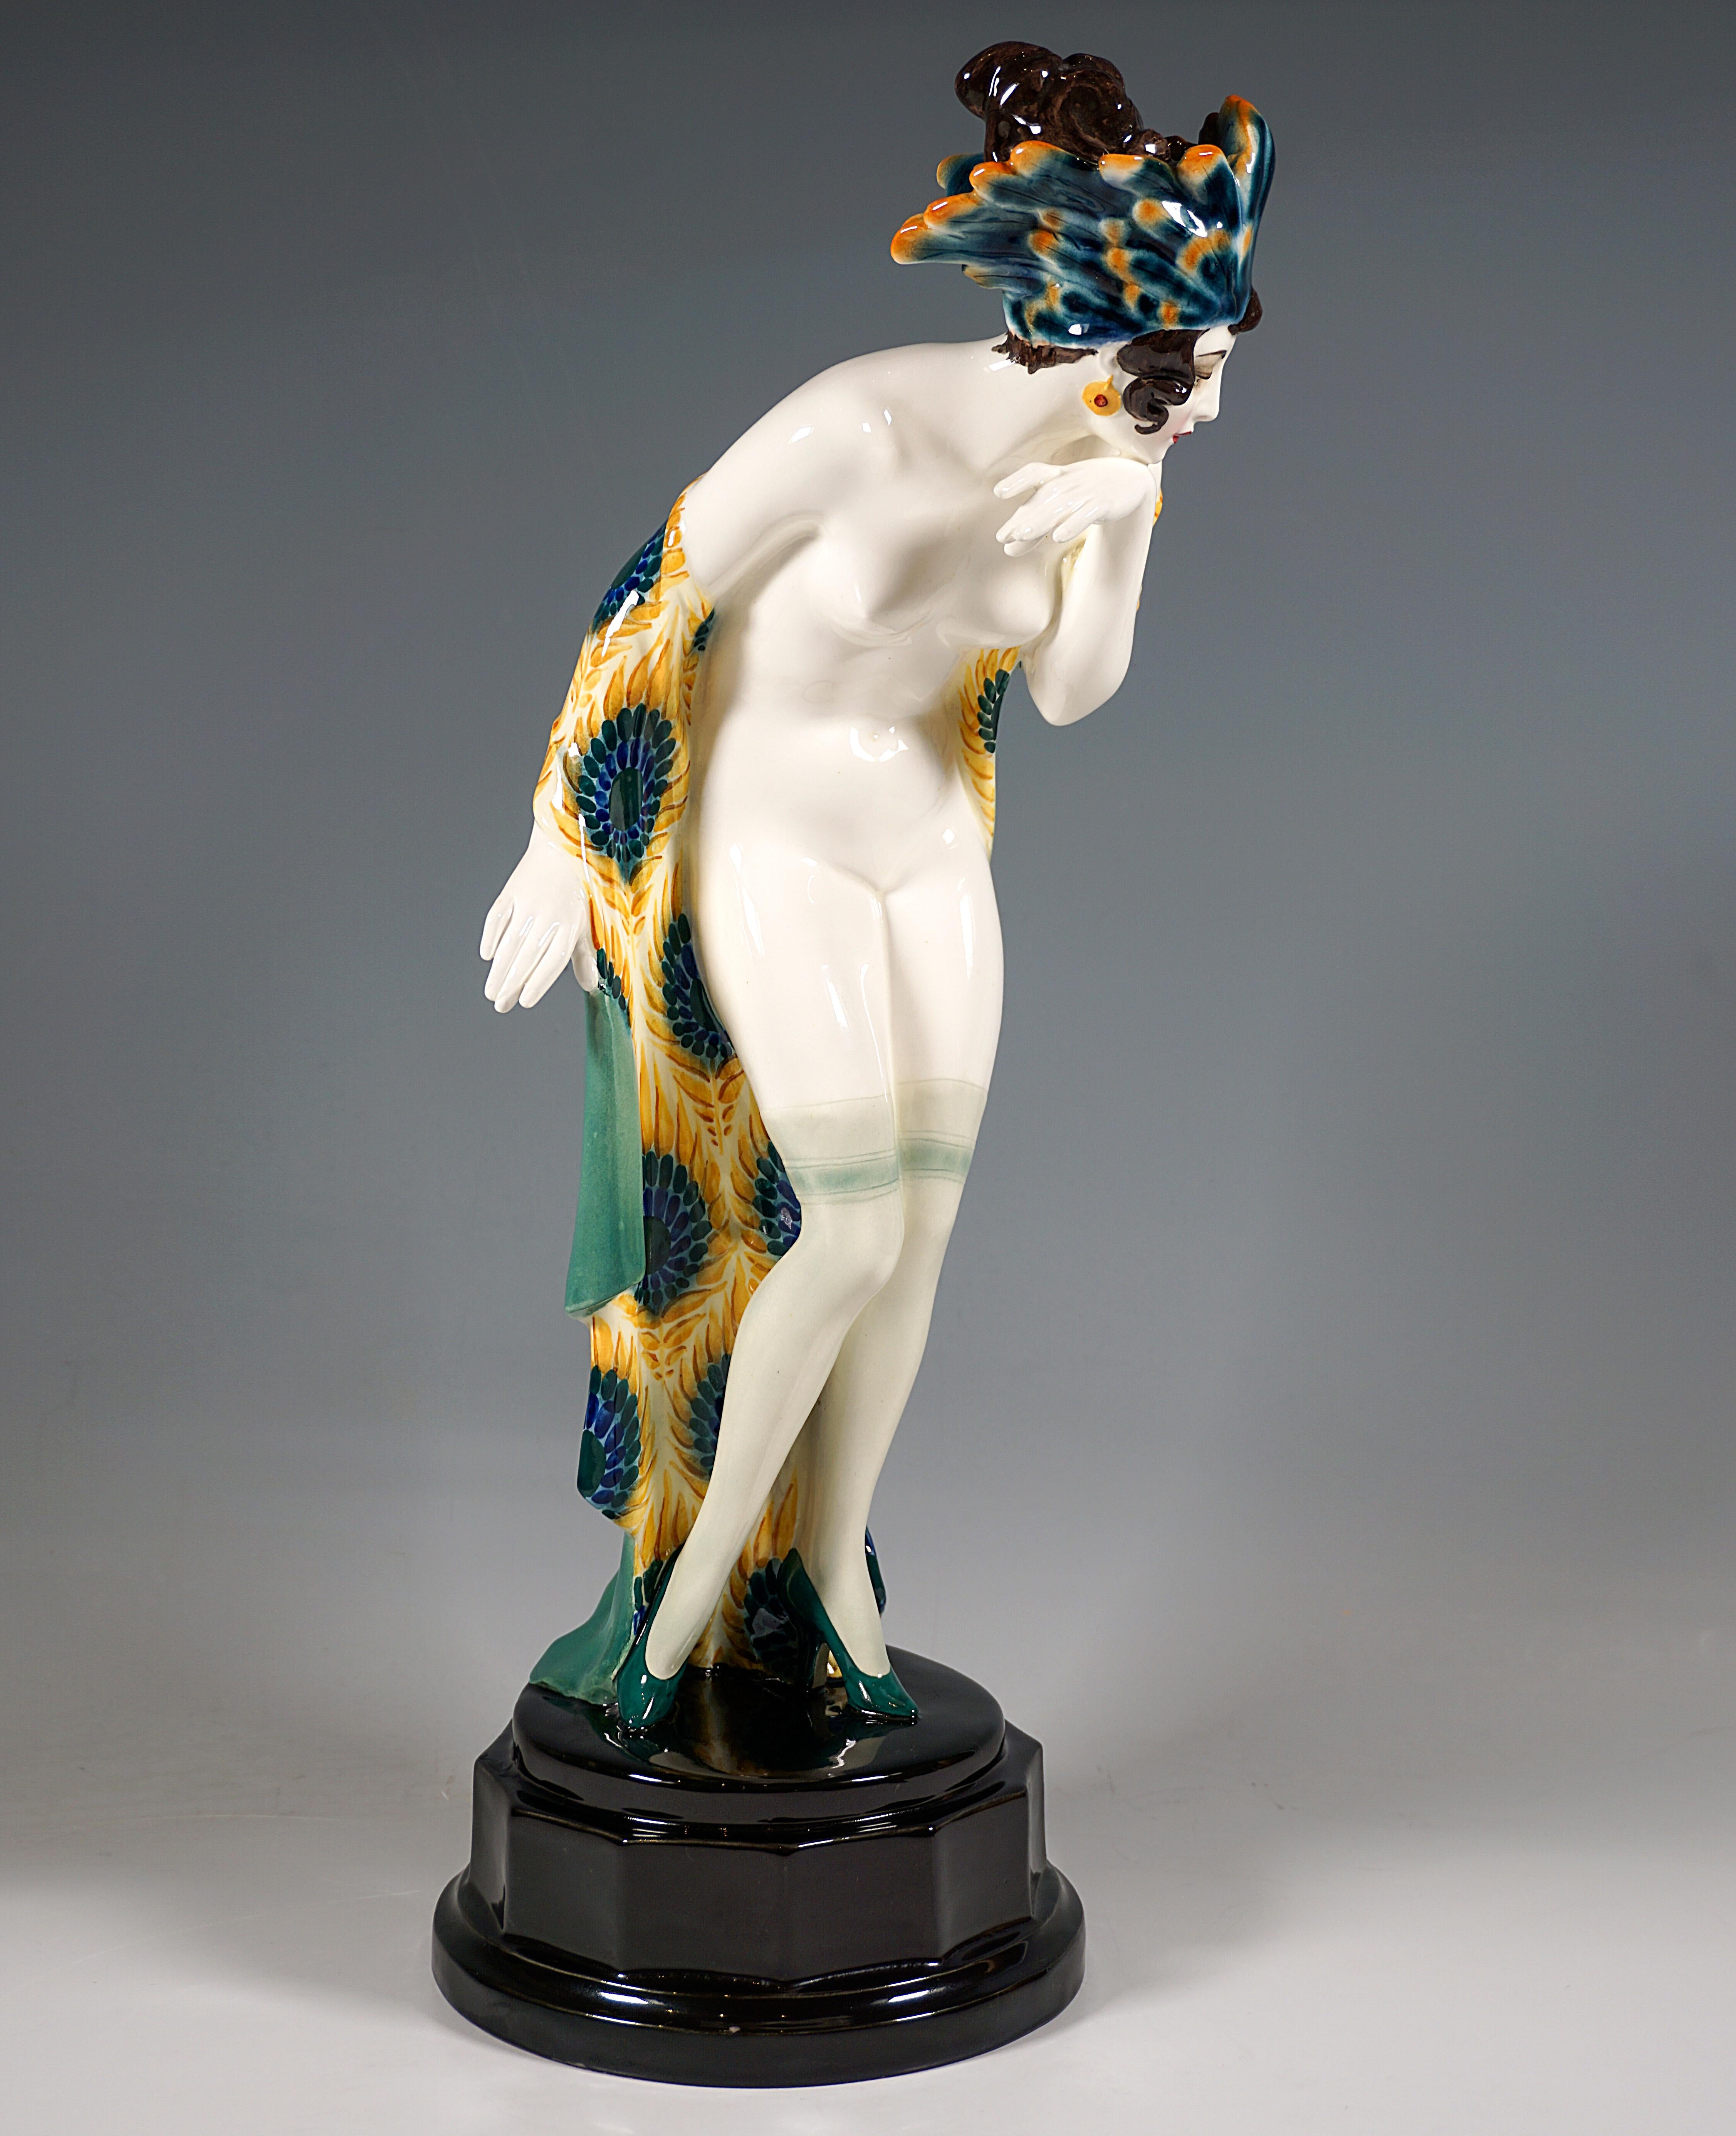 Impressive Goldscheider Vienna Ceramic Figurine of the 1920s:
The young lady with artfully pinned hair wears only transparent stockings and high heels, as well as a headdress densely decorated with shaded turquoise-yellow feathers, a green-turquoise